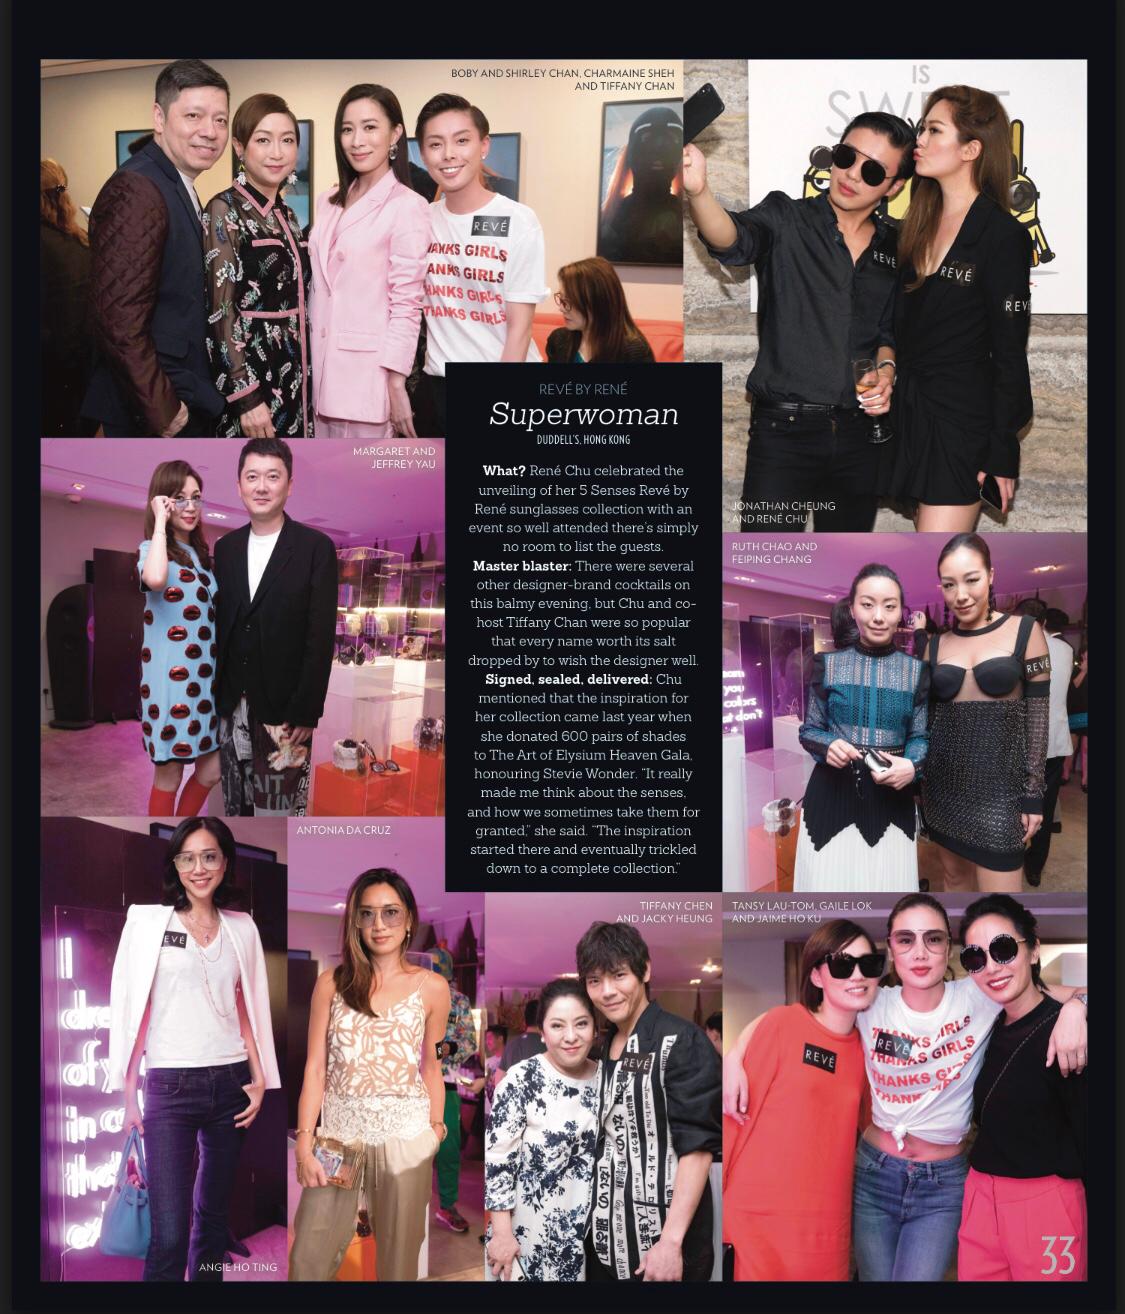 Prestige Hong Kong features REVE by RENE event, Charmaine Sheh, Bobby Chan, Shirley Chan, Tiffany Chan